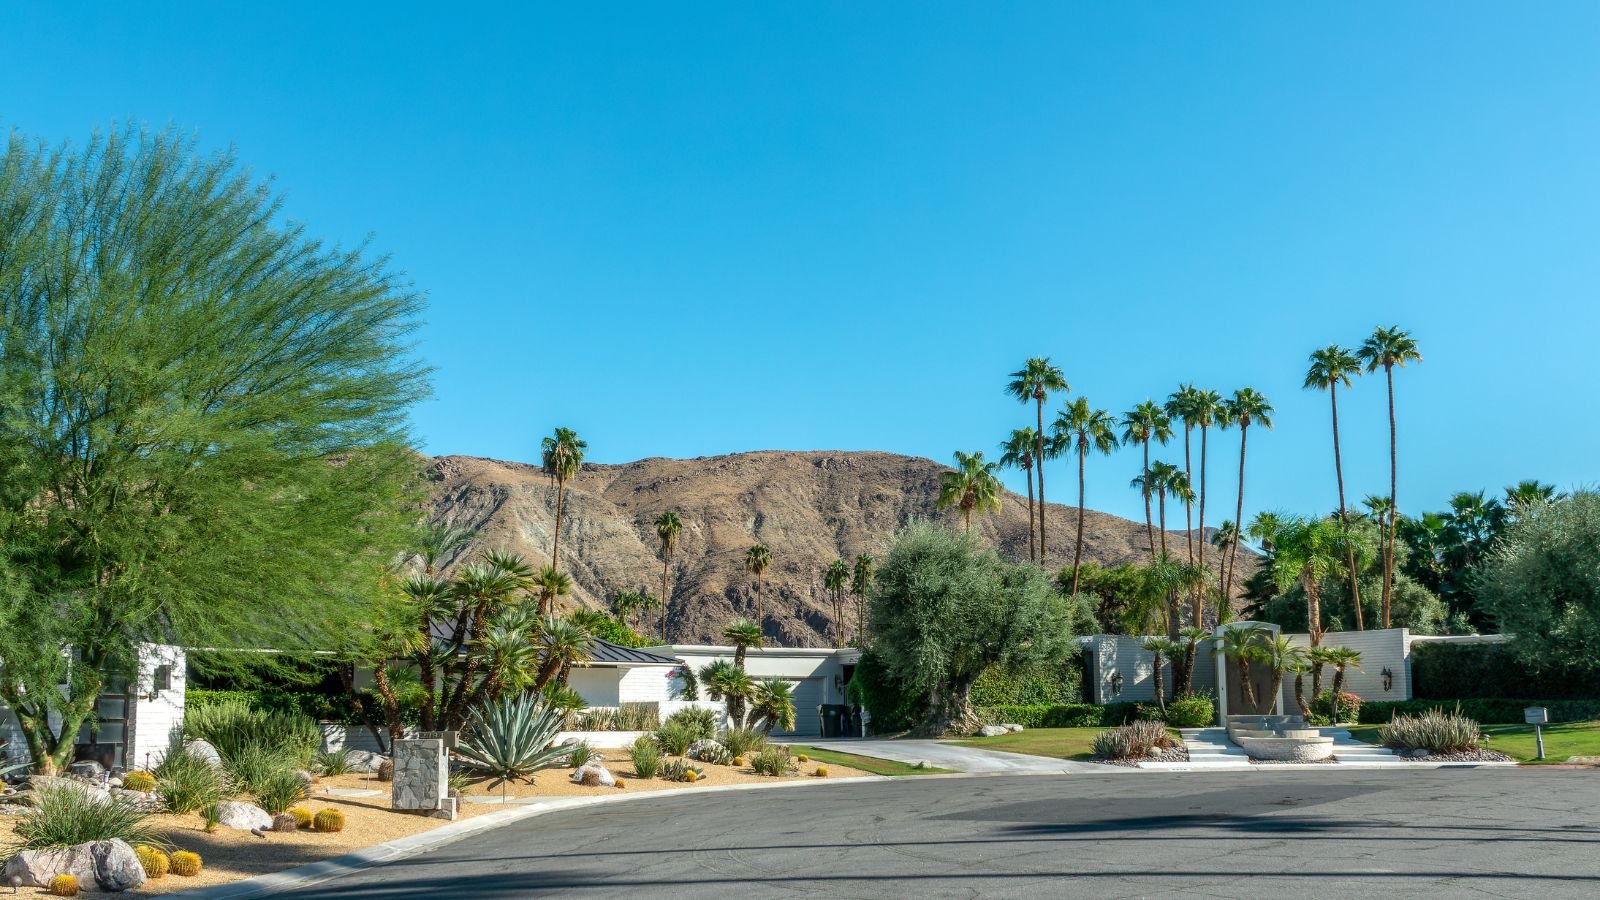 <p>People celebrate Palm Springs. They like it for its mid-century modern architecture, trendy shops, and restaurants. It attracts seniors with its stylish vibe and sunny skies before cocktails at sunset. You can spend days golfing, browsing galleries, or taking aerial tram rides.</p>